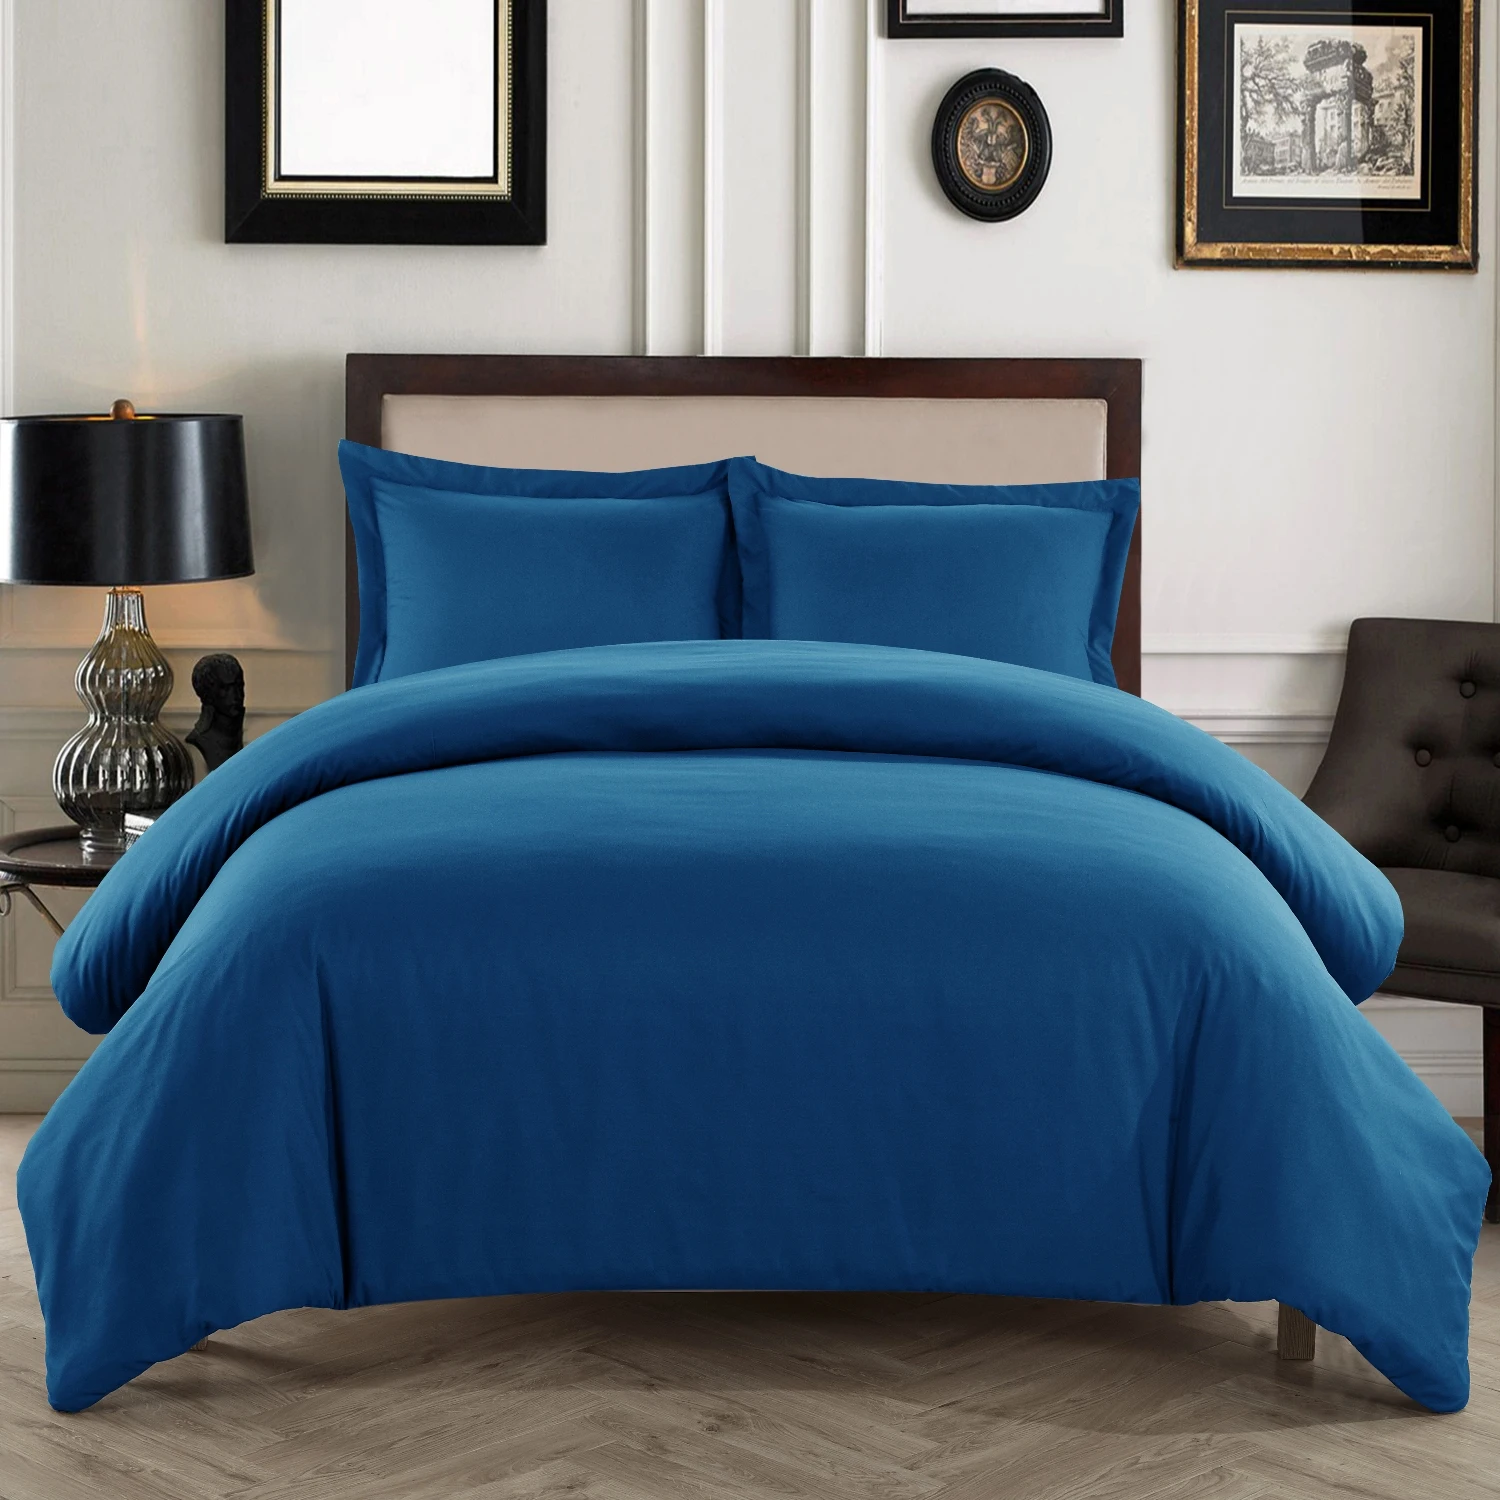 
1800 Thread Count Duvet Cover Set, 3pc Luxury Soft, All Sizes & Colors, King Navy Blue 